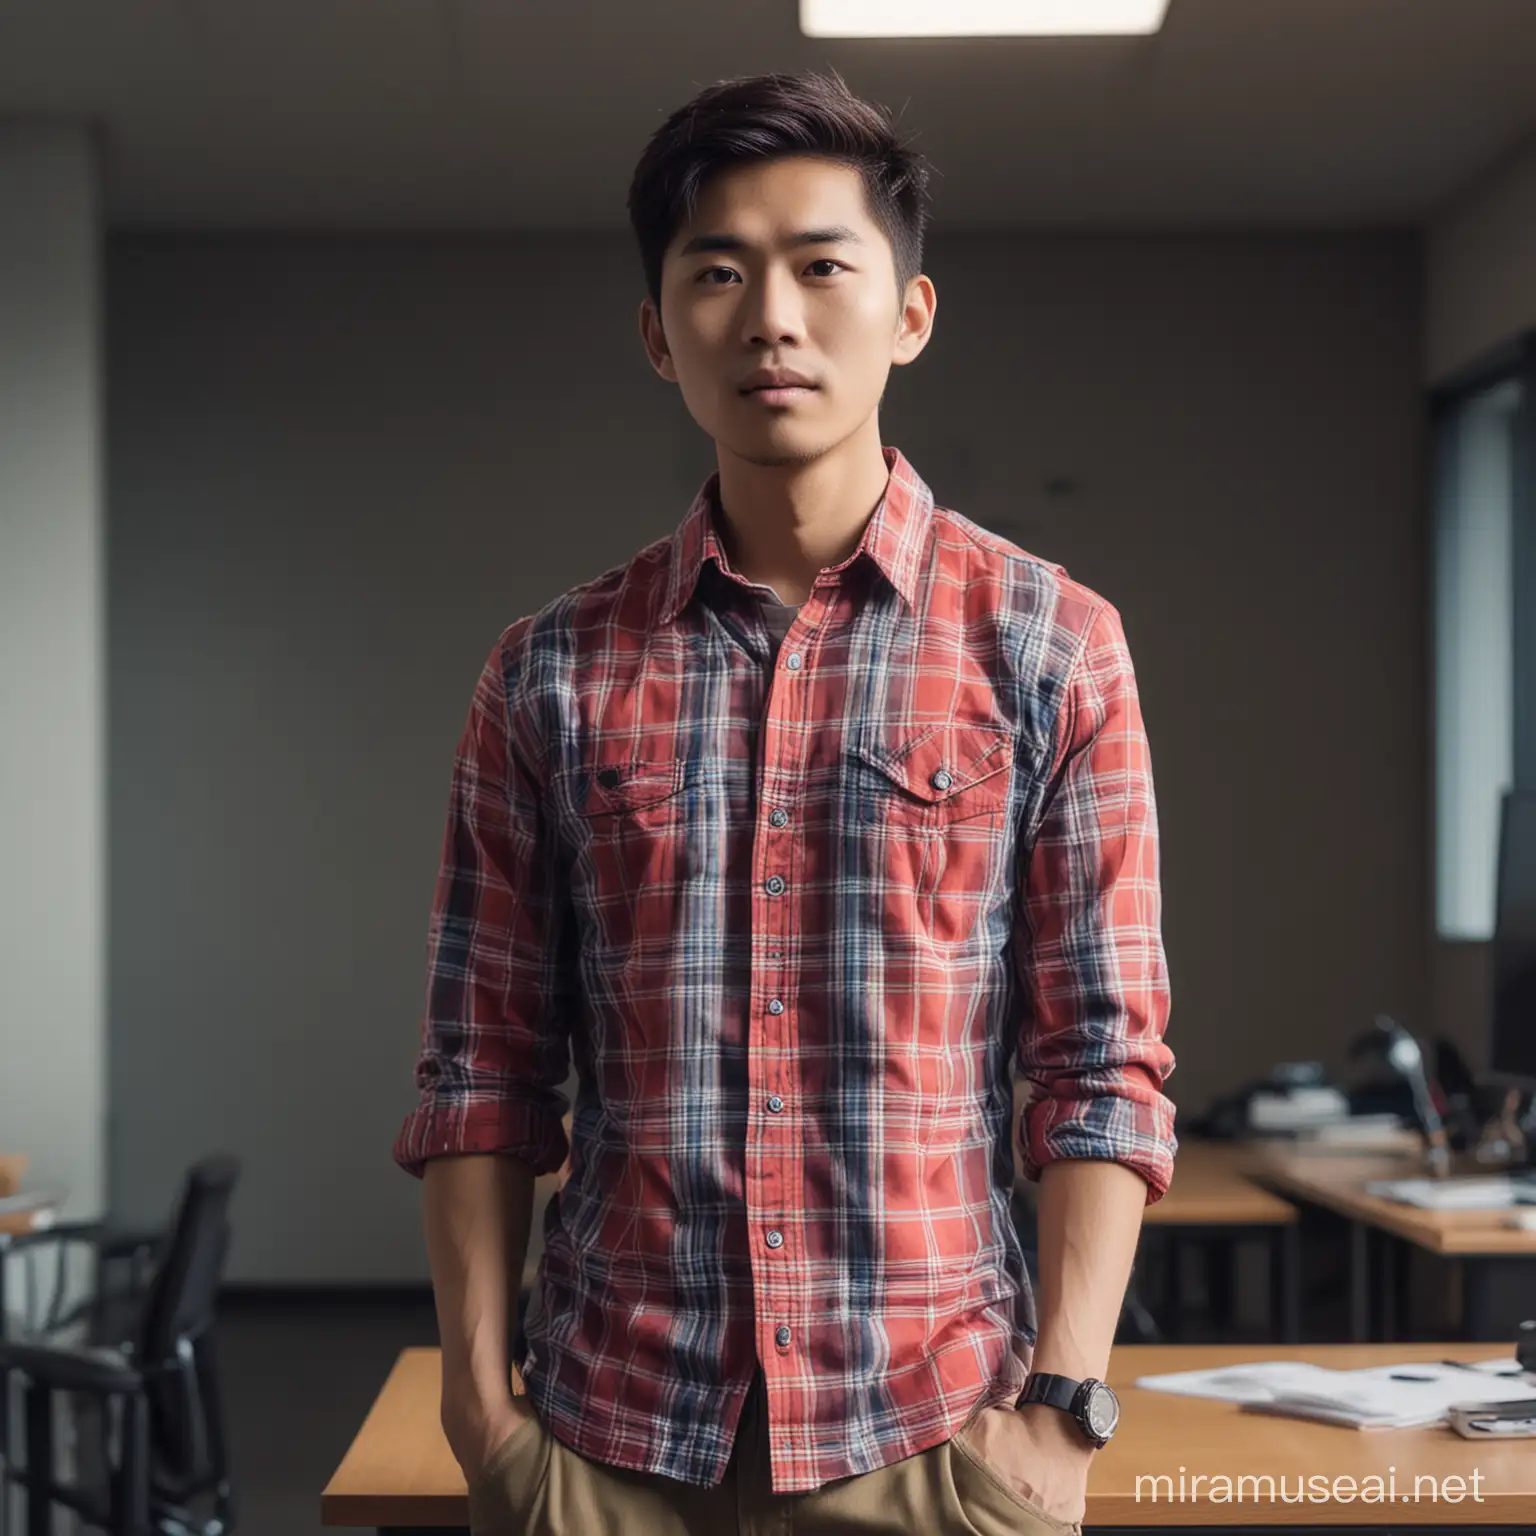 Youthful Asian Male in Urban Office Wear with Fluorescent Lighting